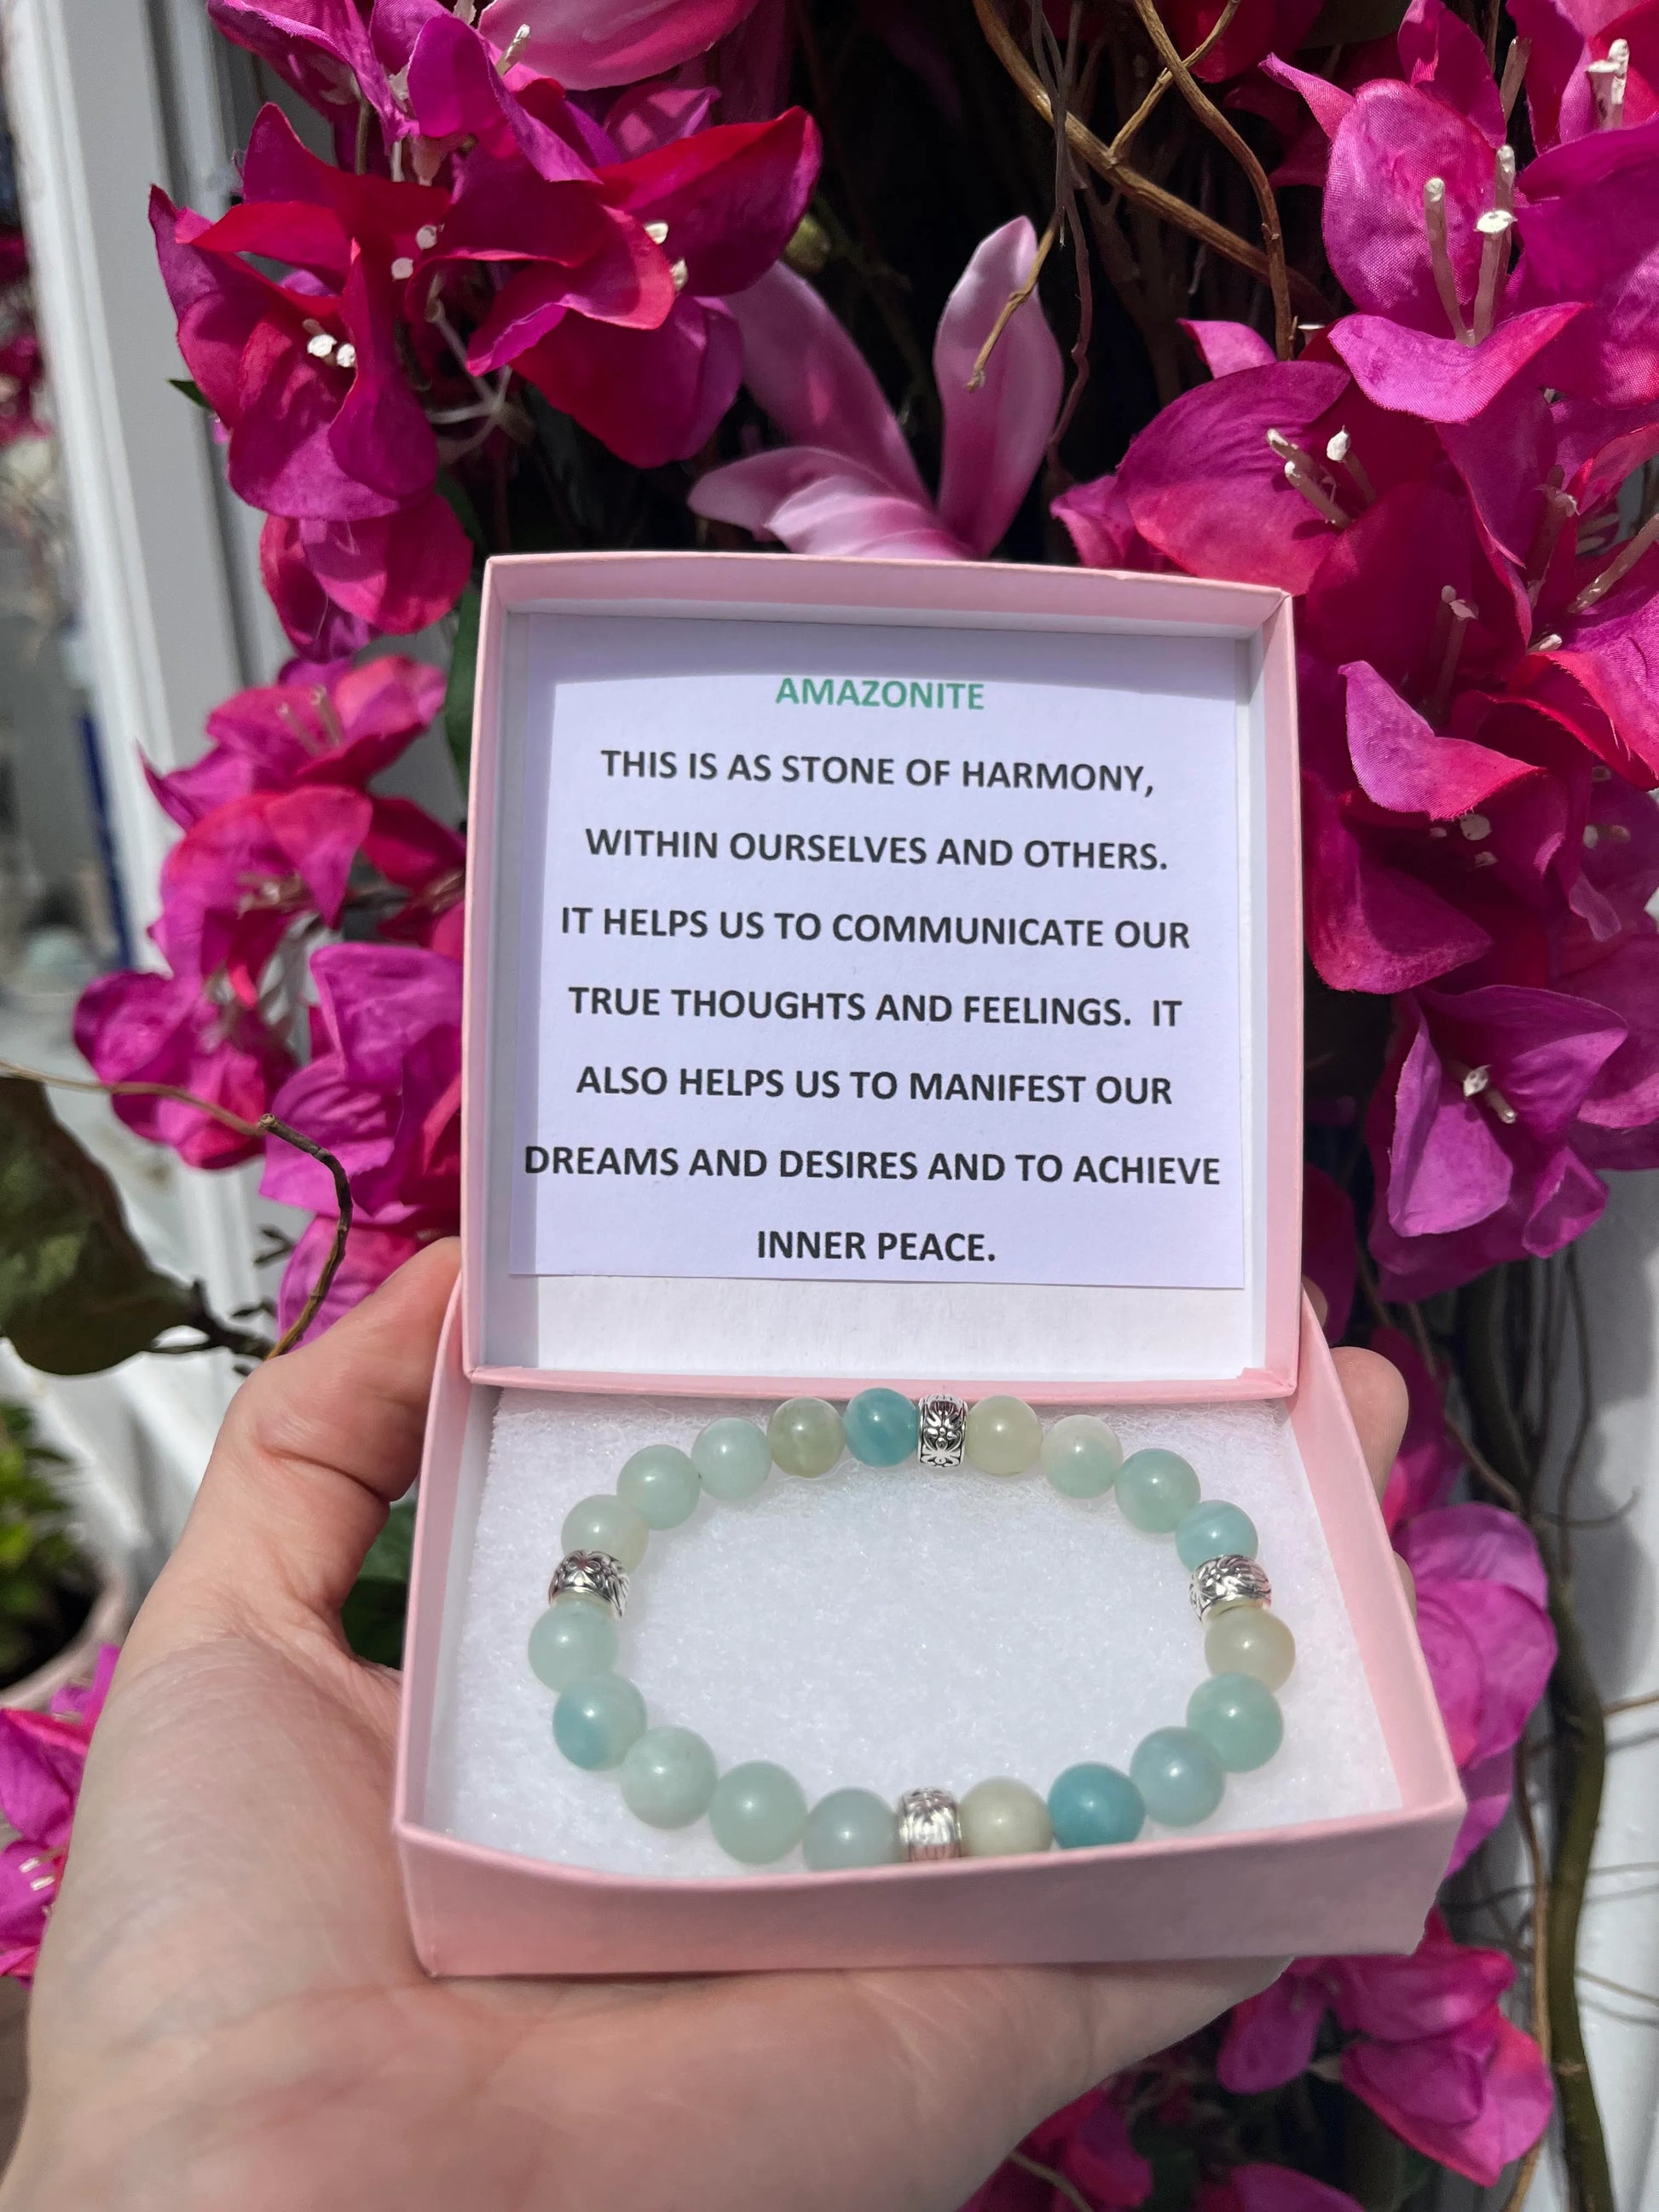 A crystal bracelet in a pink box with a typed description in the lid that reads - Amazonite - This is a stone of harmony, within ourselves and others. It helps us to communicate our true thoughts and feelings. It also helps us to manifest our dreams and desires and to achieve inner peace.